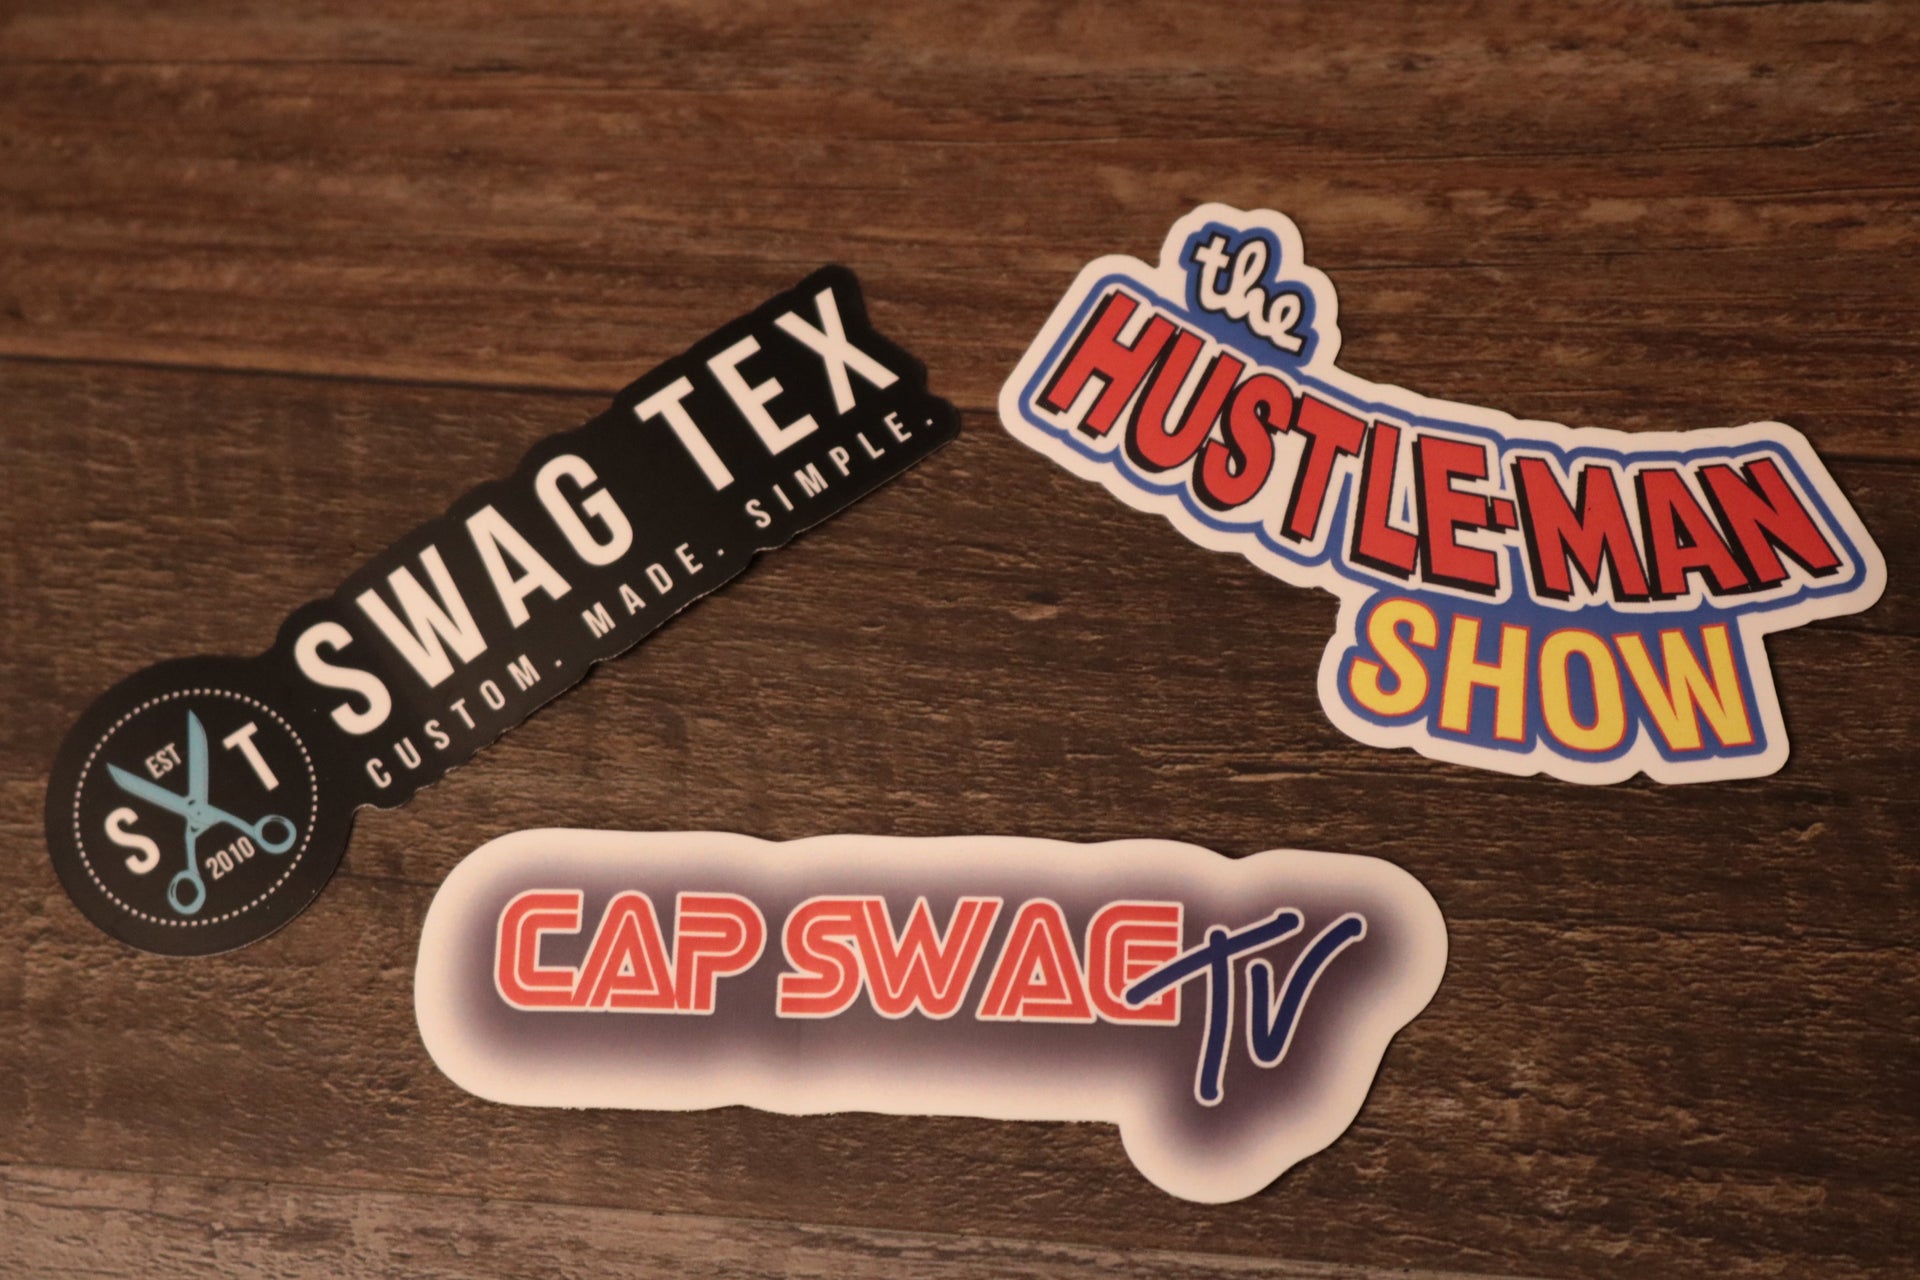 Capswag Inspired Stickers | Cap Swag Inspired Sticker Collection